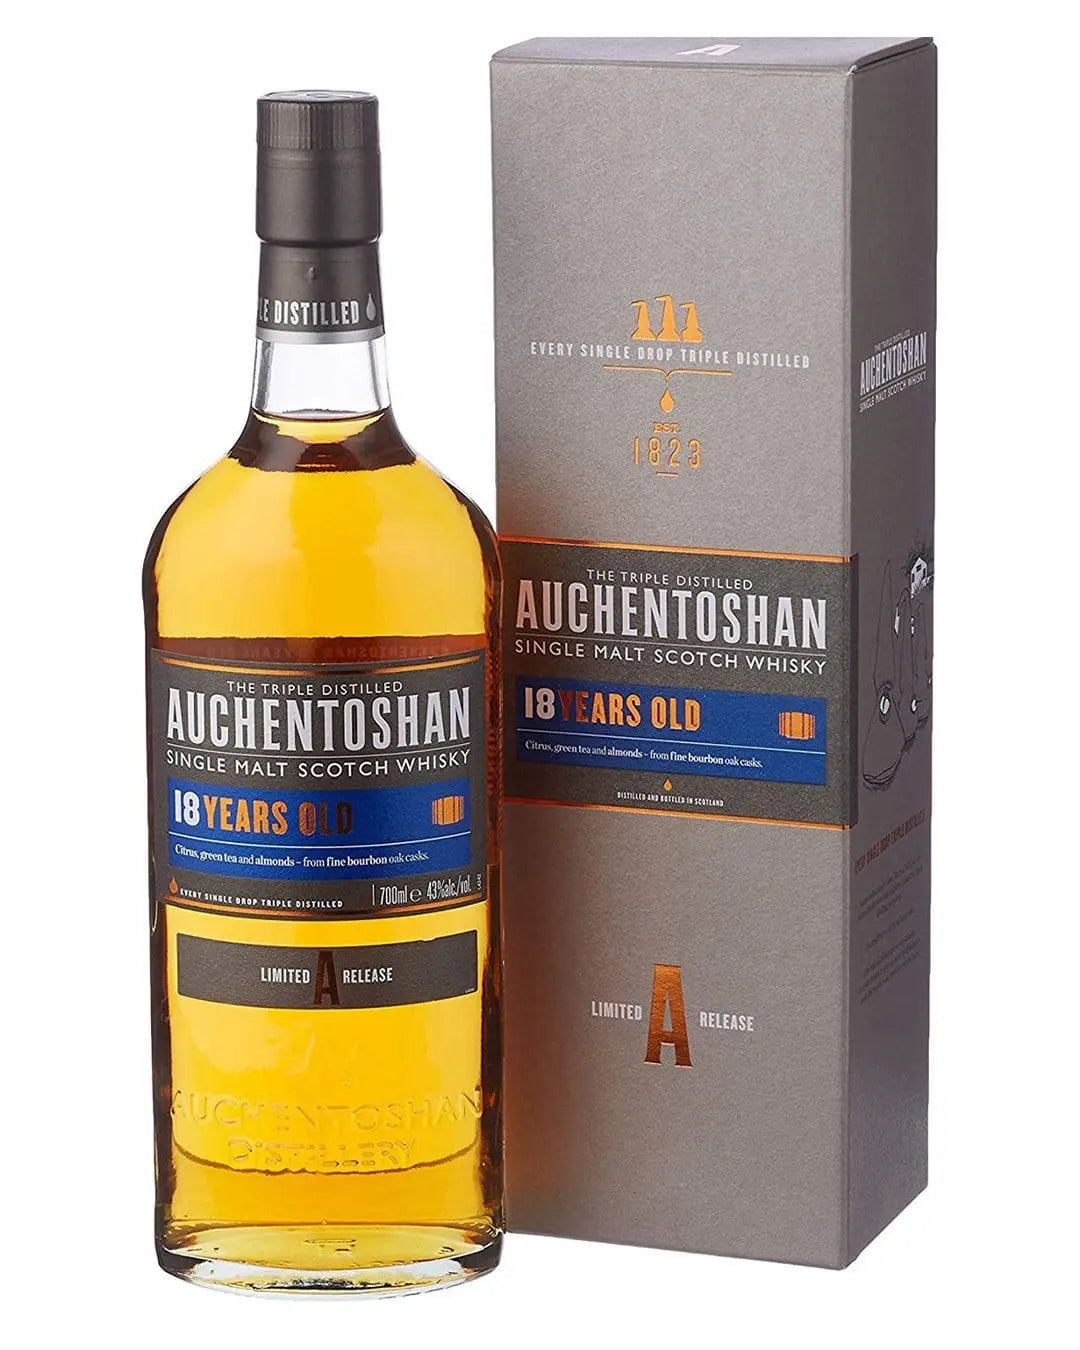 Auchentoshan 18 Year Old Whisky, 70 cl Whisky 5010496001776